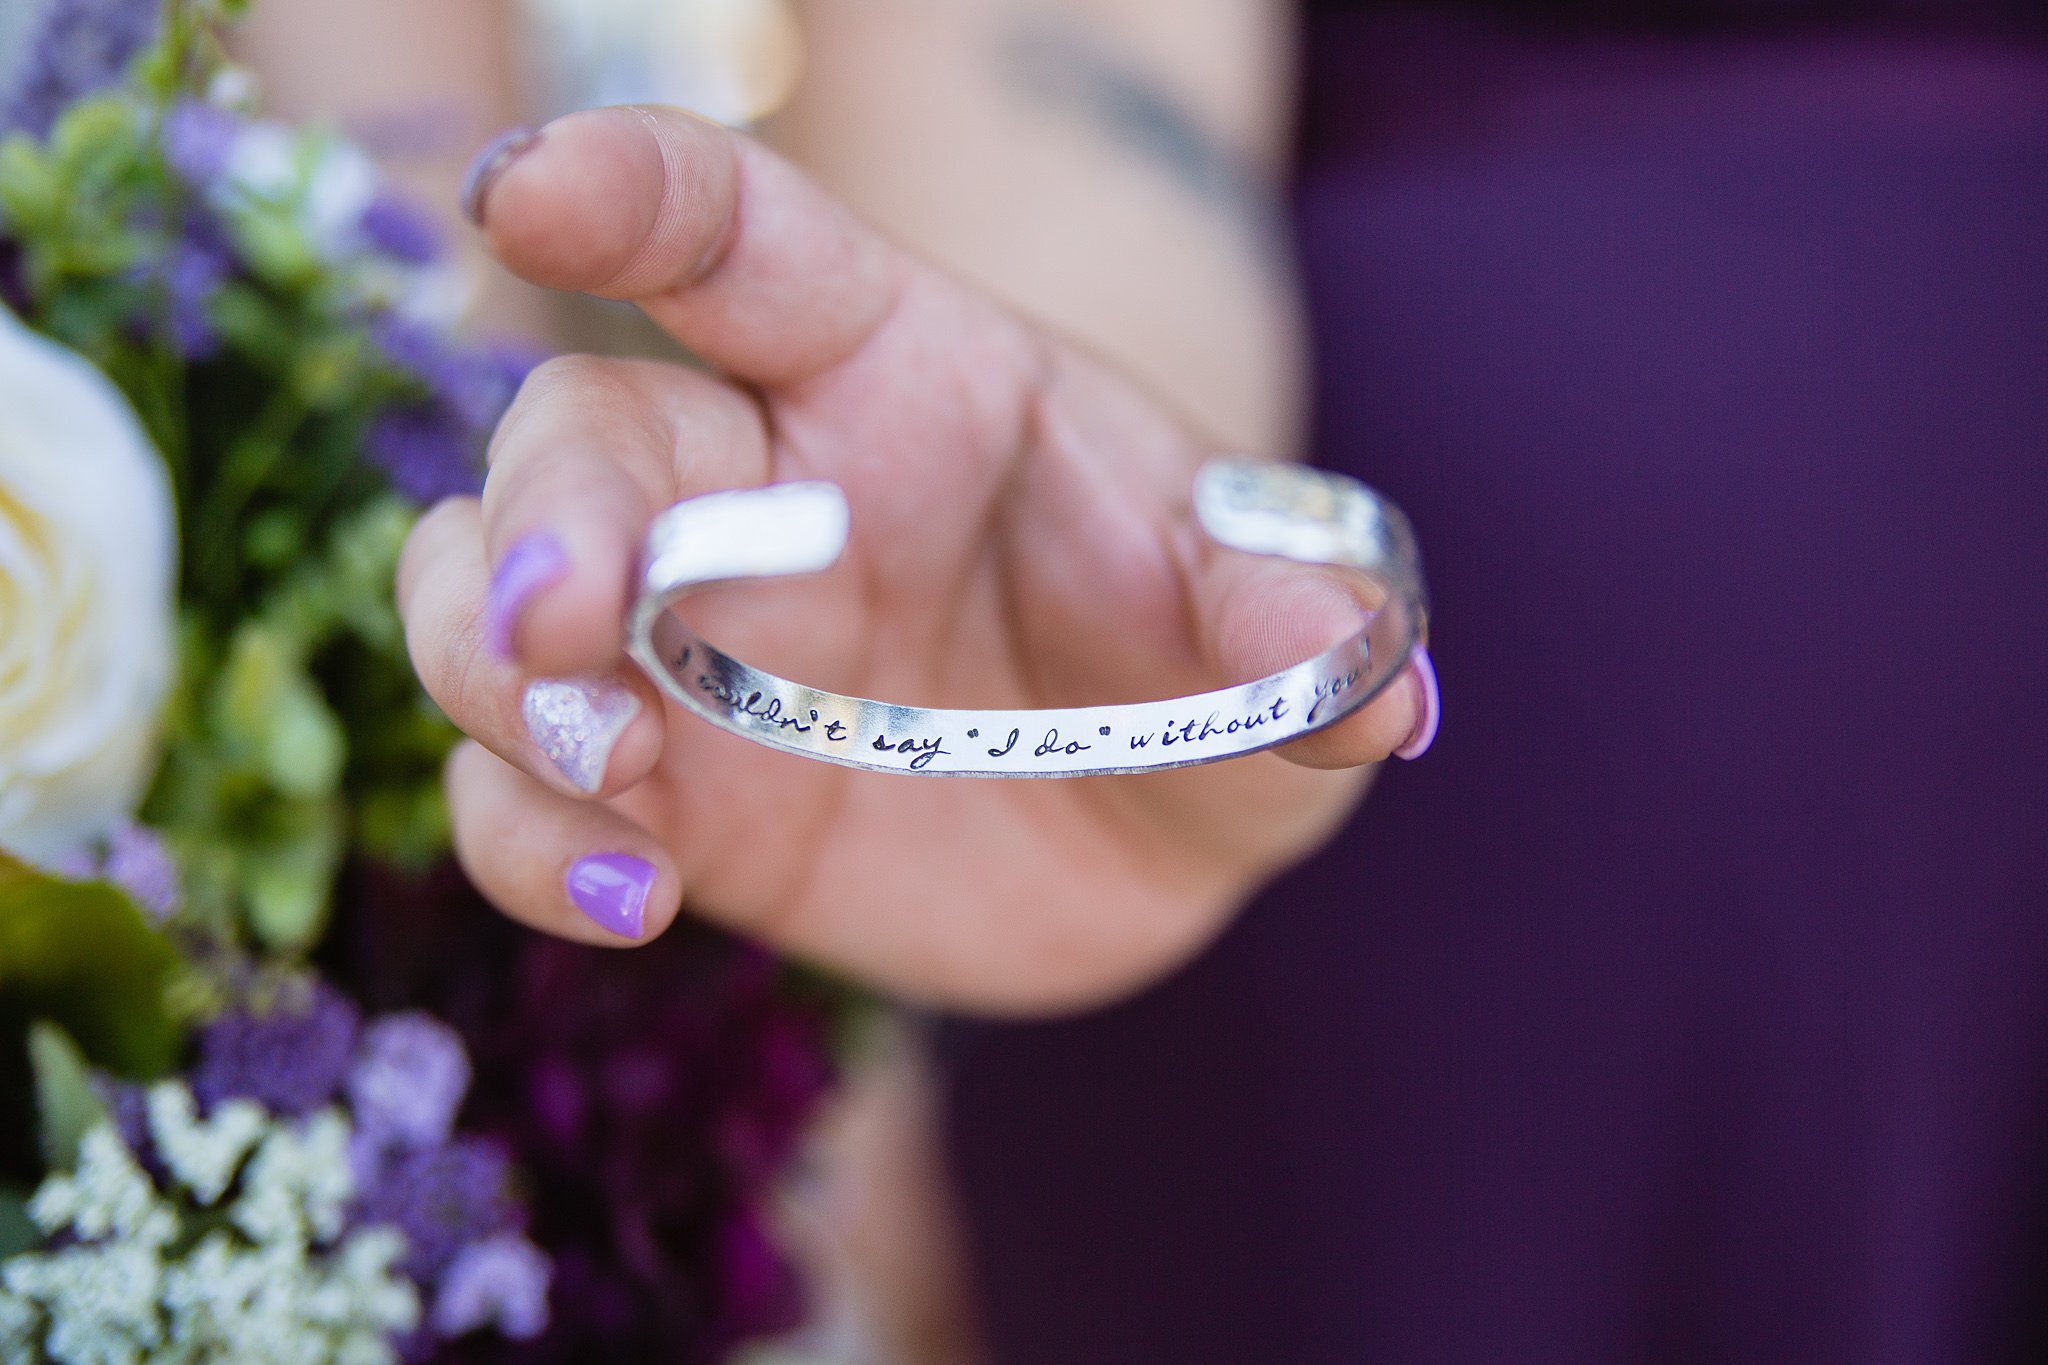 Bridesmaids gift bracelet "I couldn't say I do without you" by wedding photographer PMA Photography.